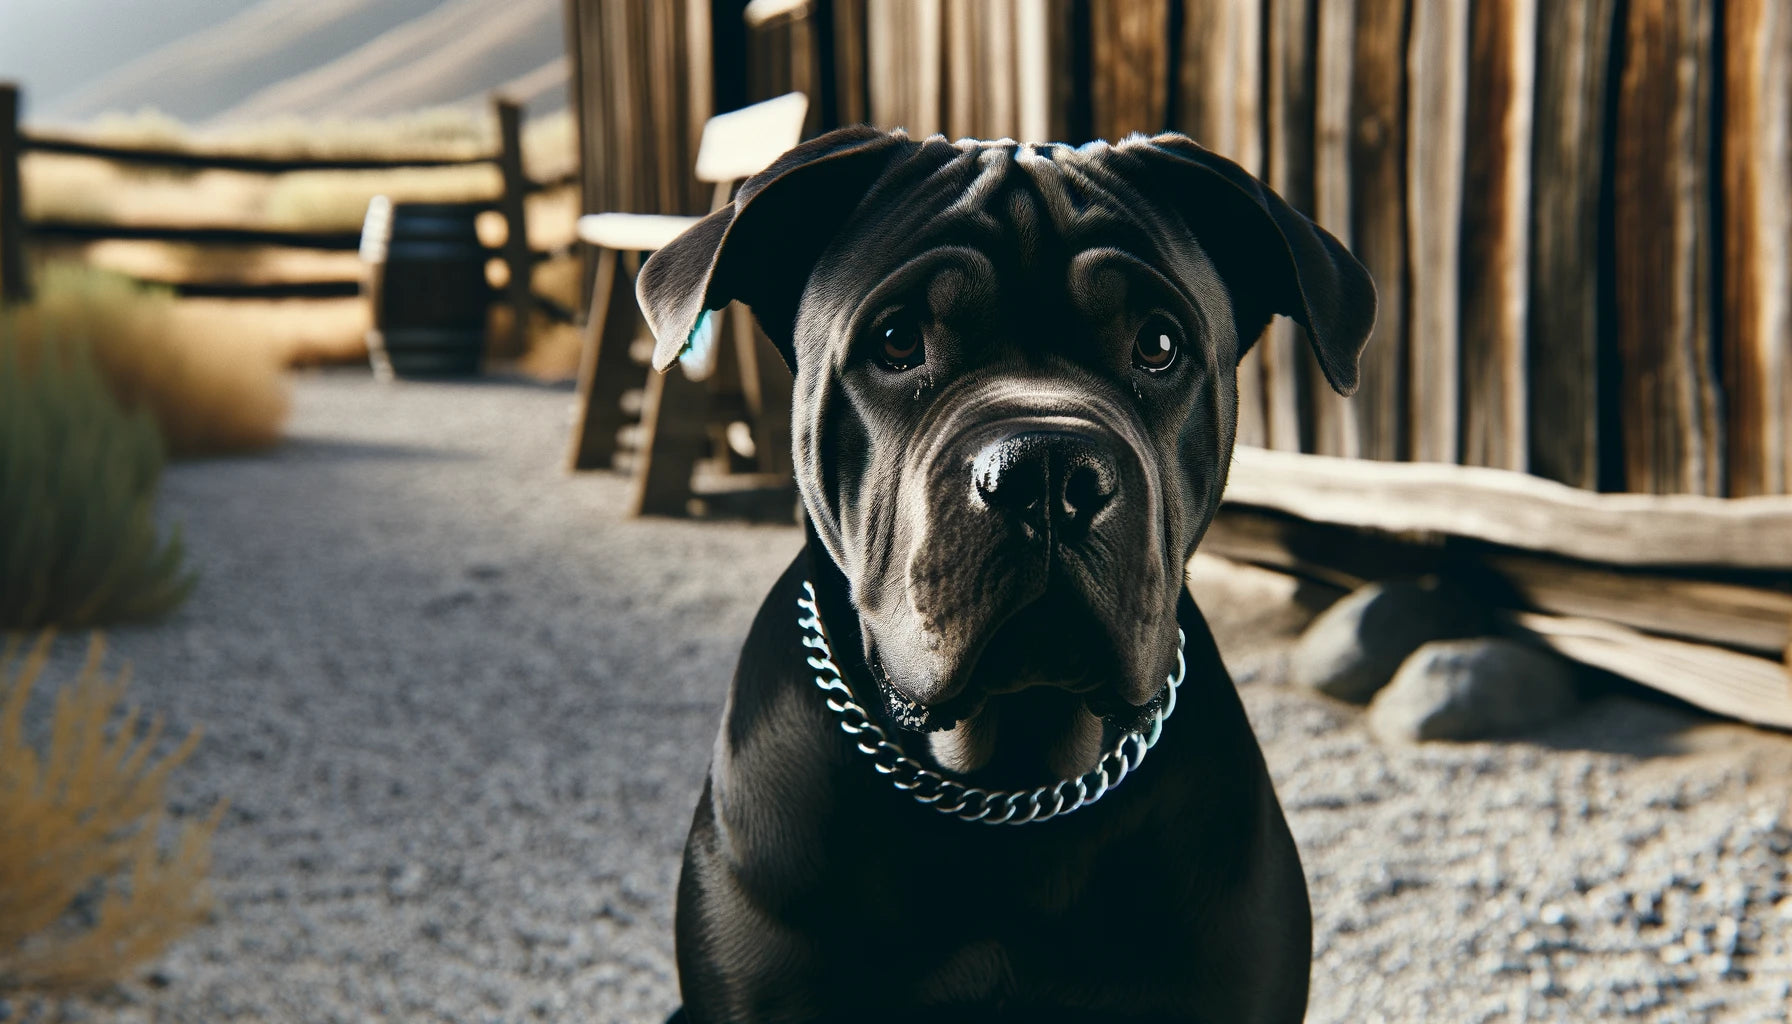 Black Cane Corso dog sitting in front of a wooden fence